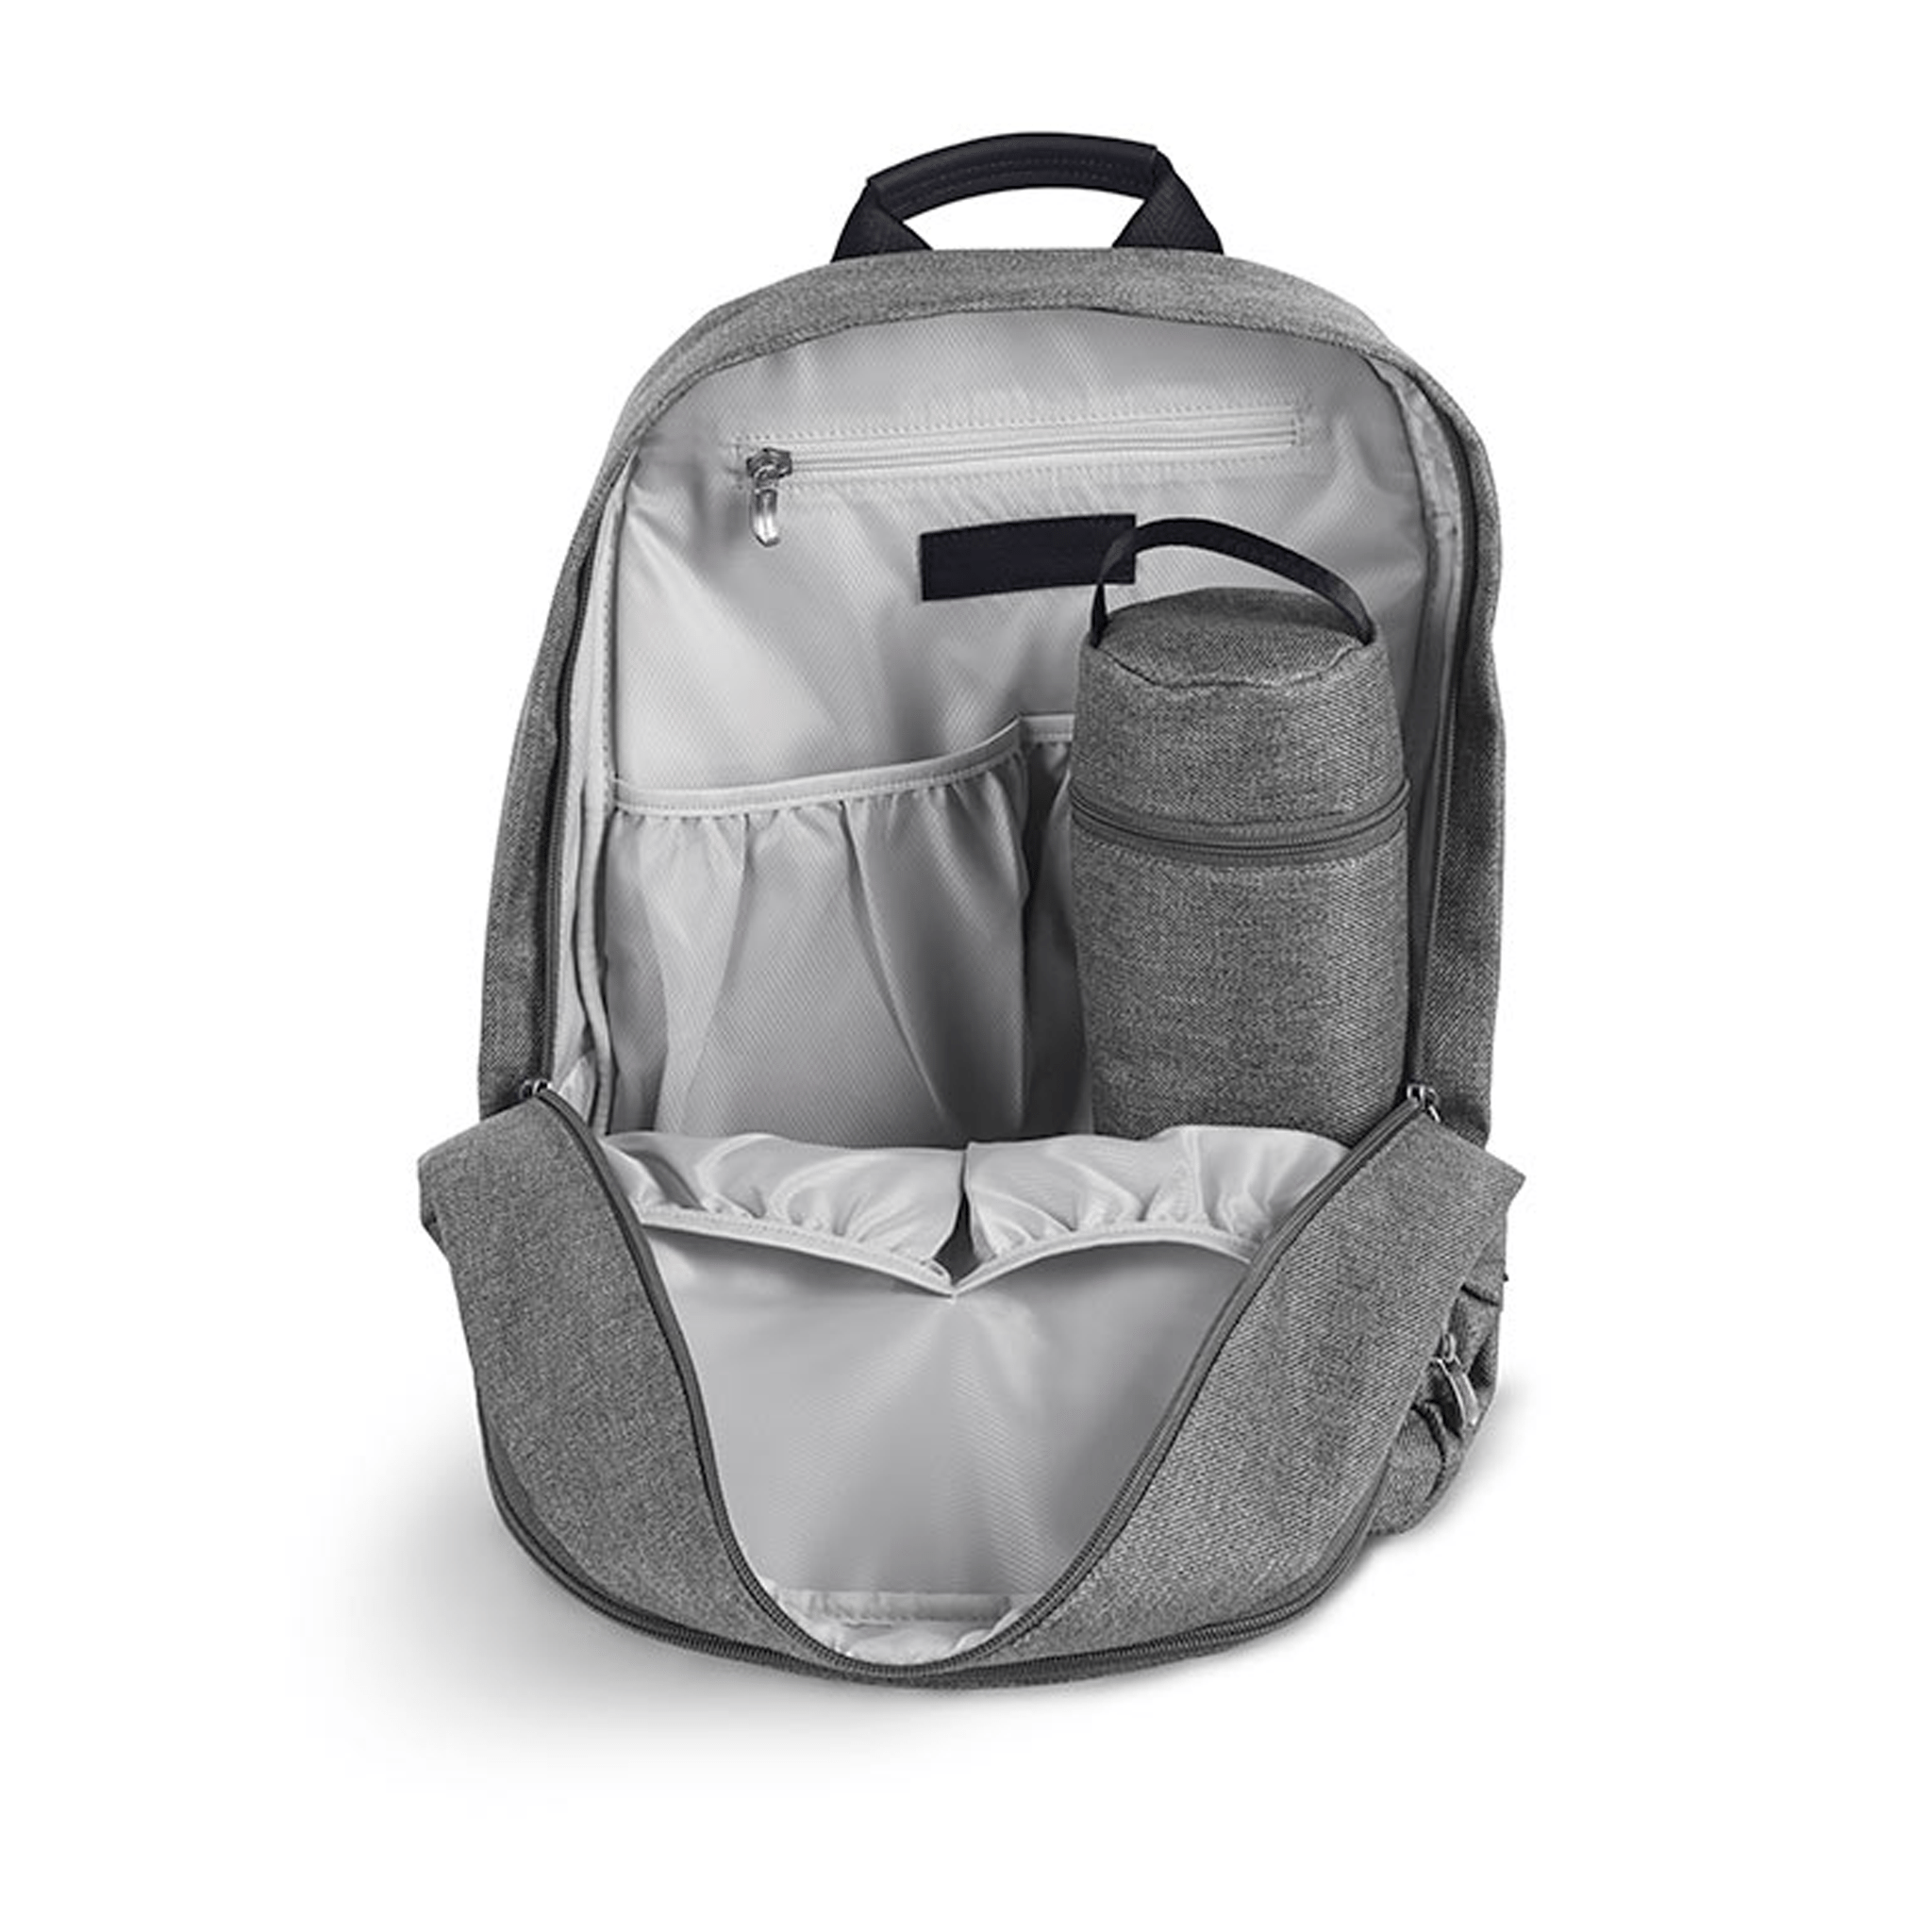 Uppababy changing bags UPPAbaby Changing Backpack Greyson 0919-DPB-WW-GRY